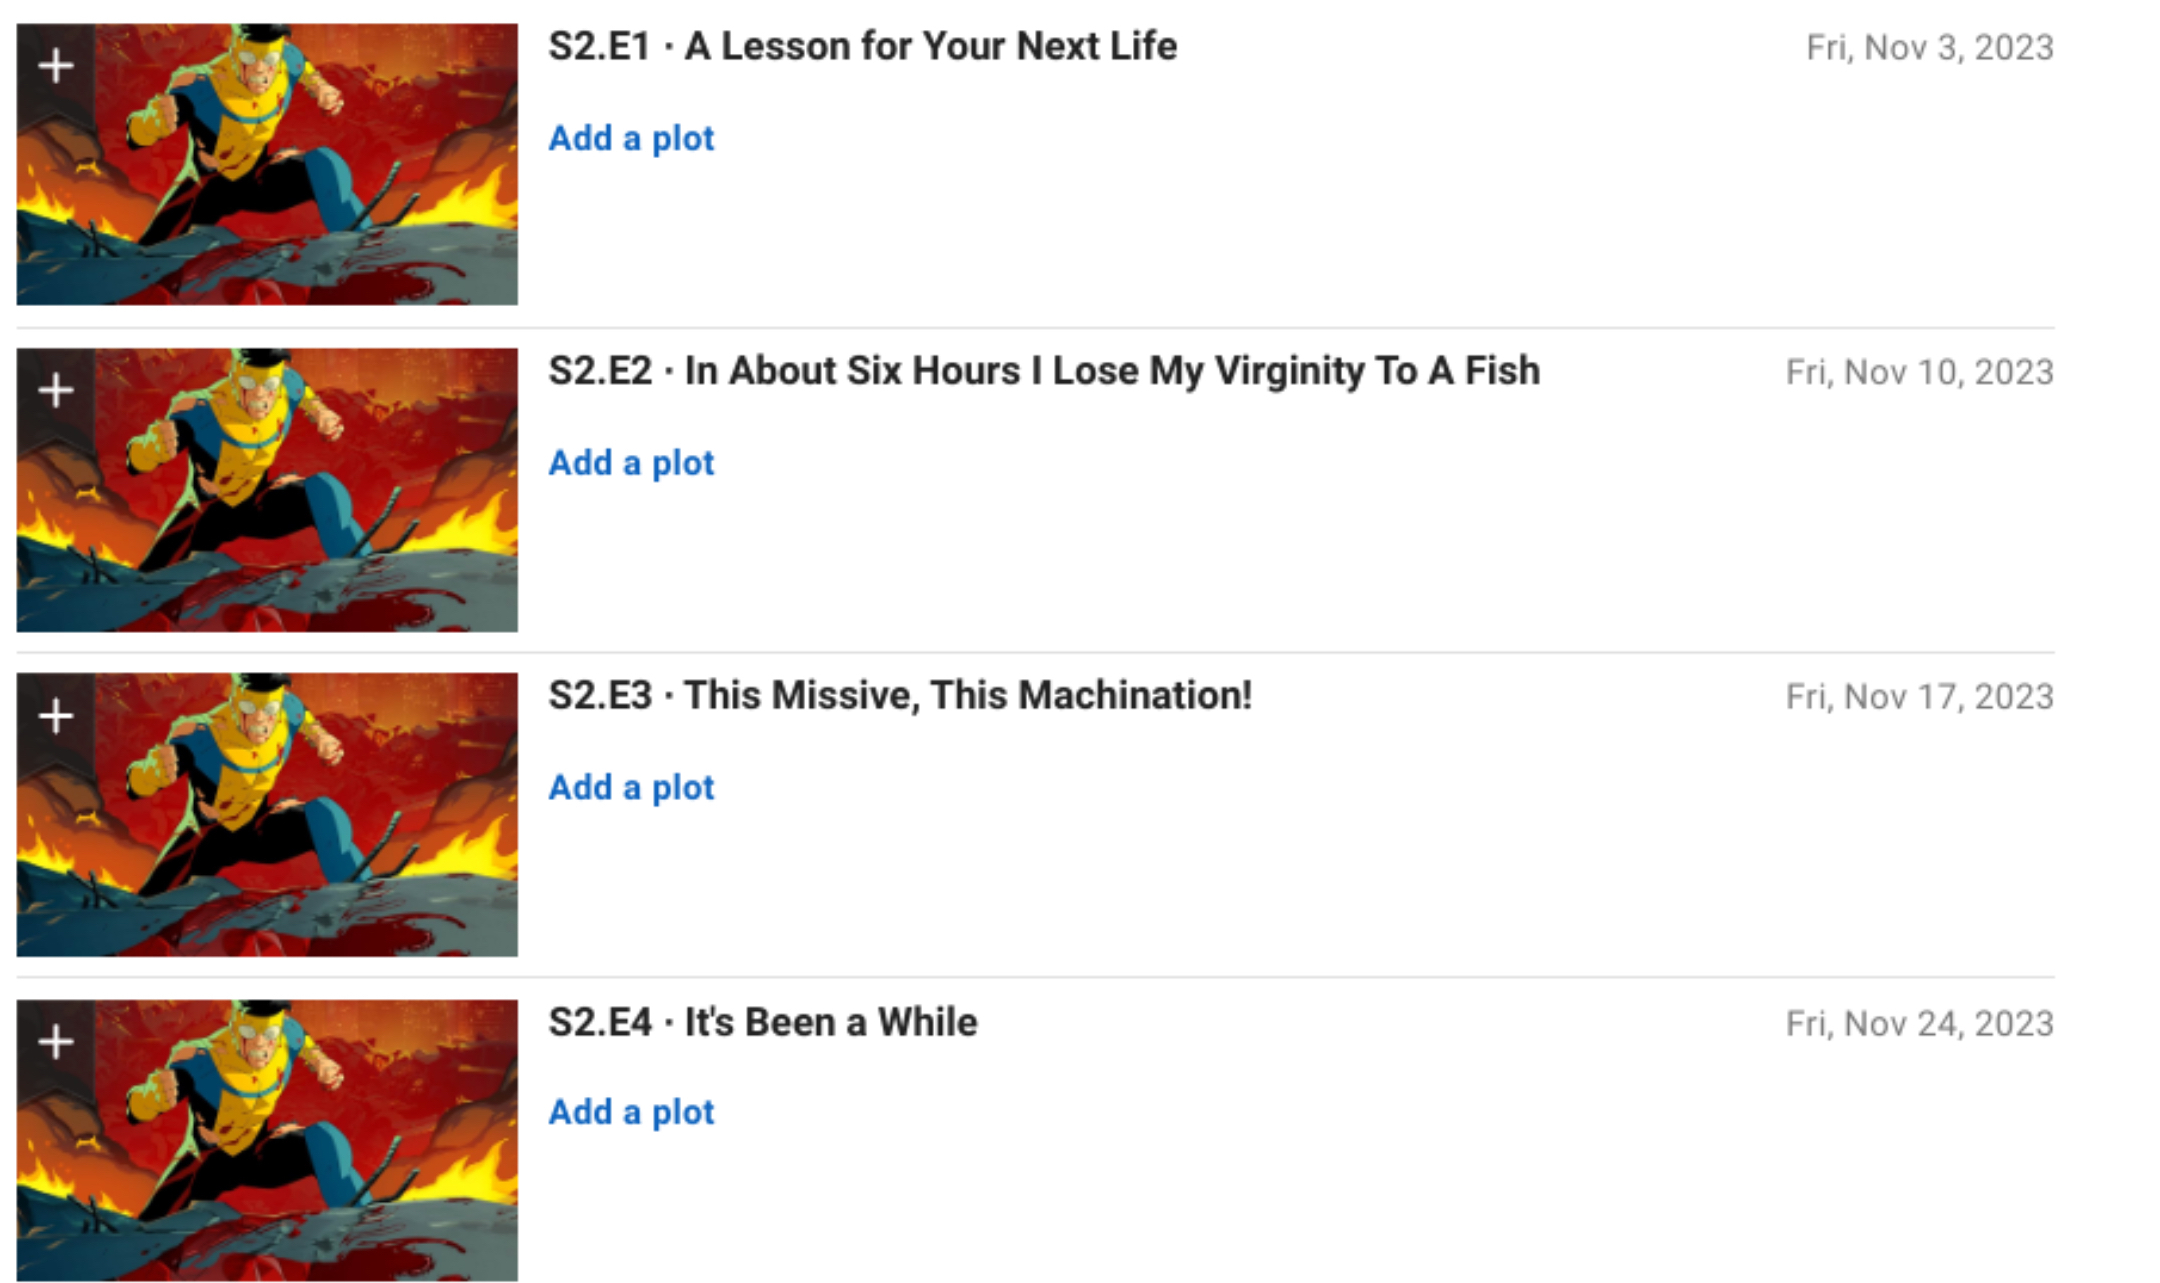 According to IMDb, the first episode of season two is called 'A Lesson for  Your Next Life'. : r/Invincible